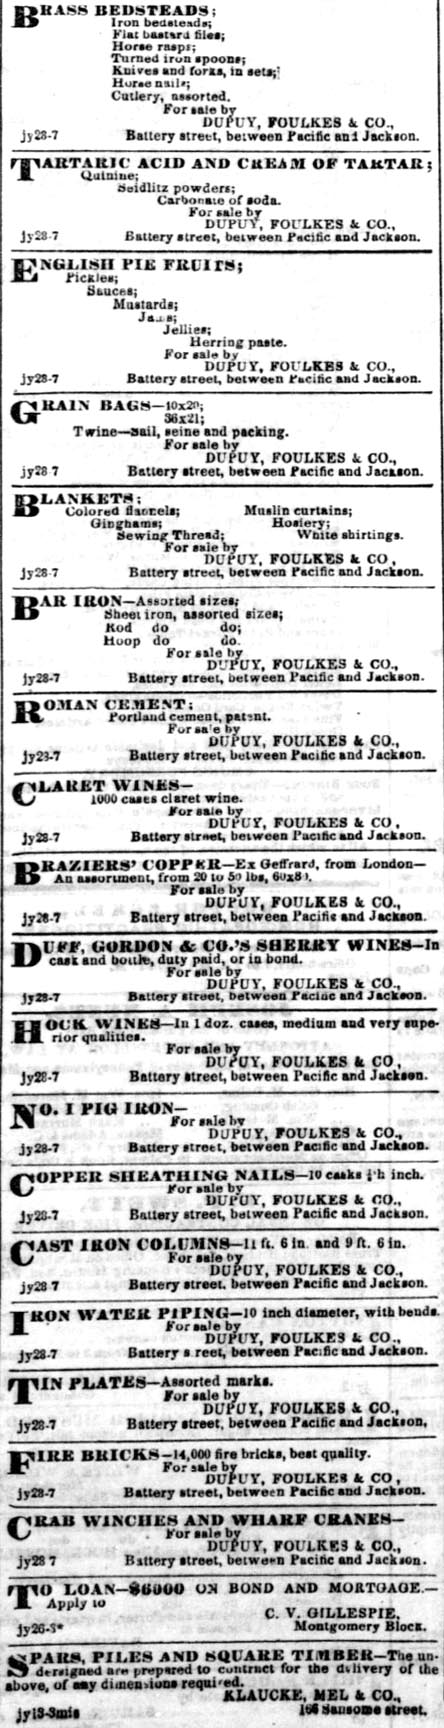 Daily Alta California Ads for merchants Dupuy Foulkes and Co.